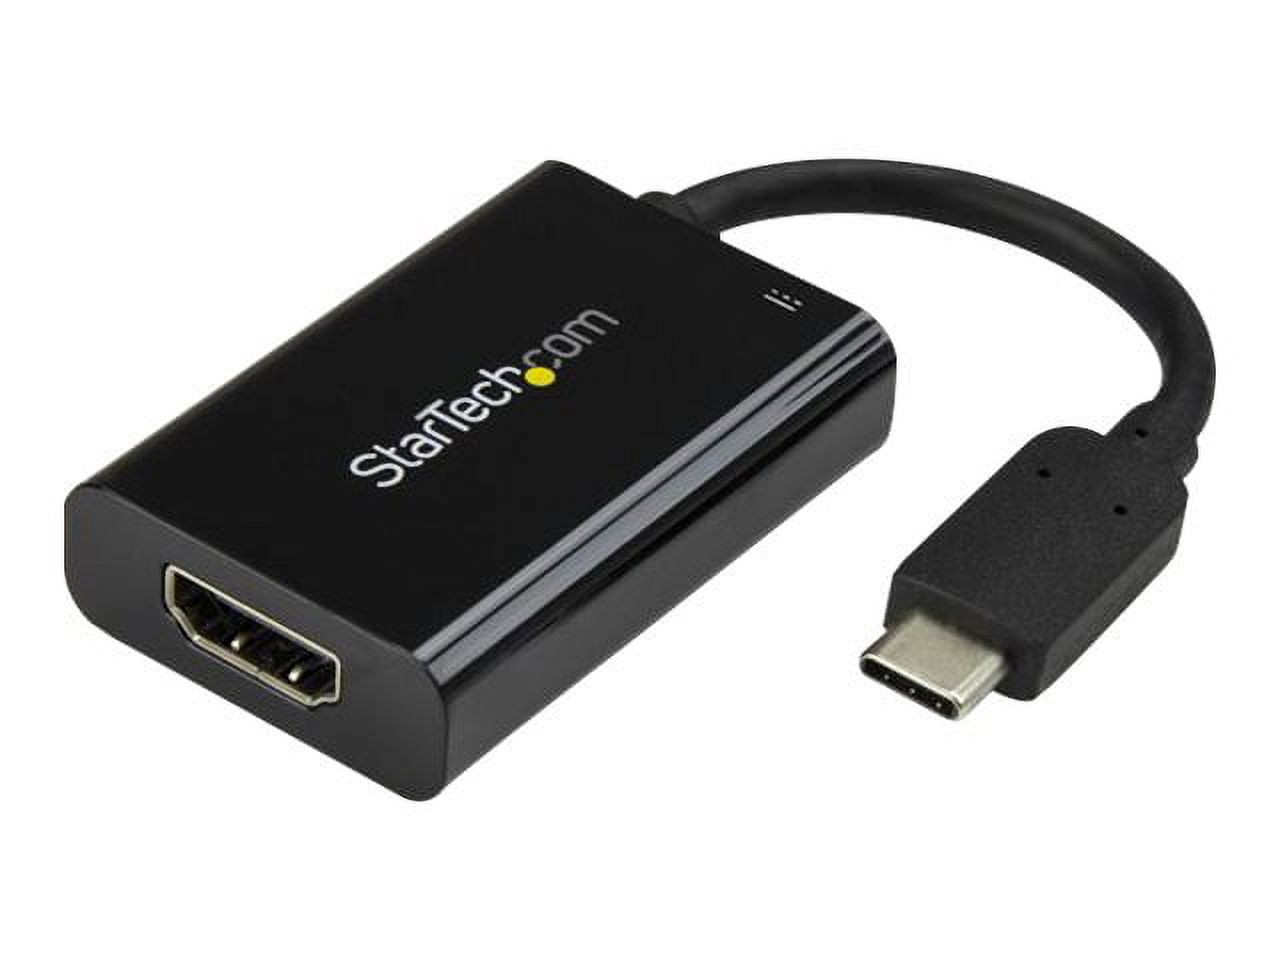 StarTech.com CDP2HDUCP USB-C to HDMI Adapter - 4K 60Hz - Thunderbolt 3 Compatible - with Power Delivery (USB PD) - USB C Adapter Converter - image 1 of 6